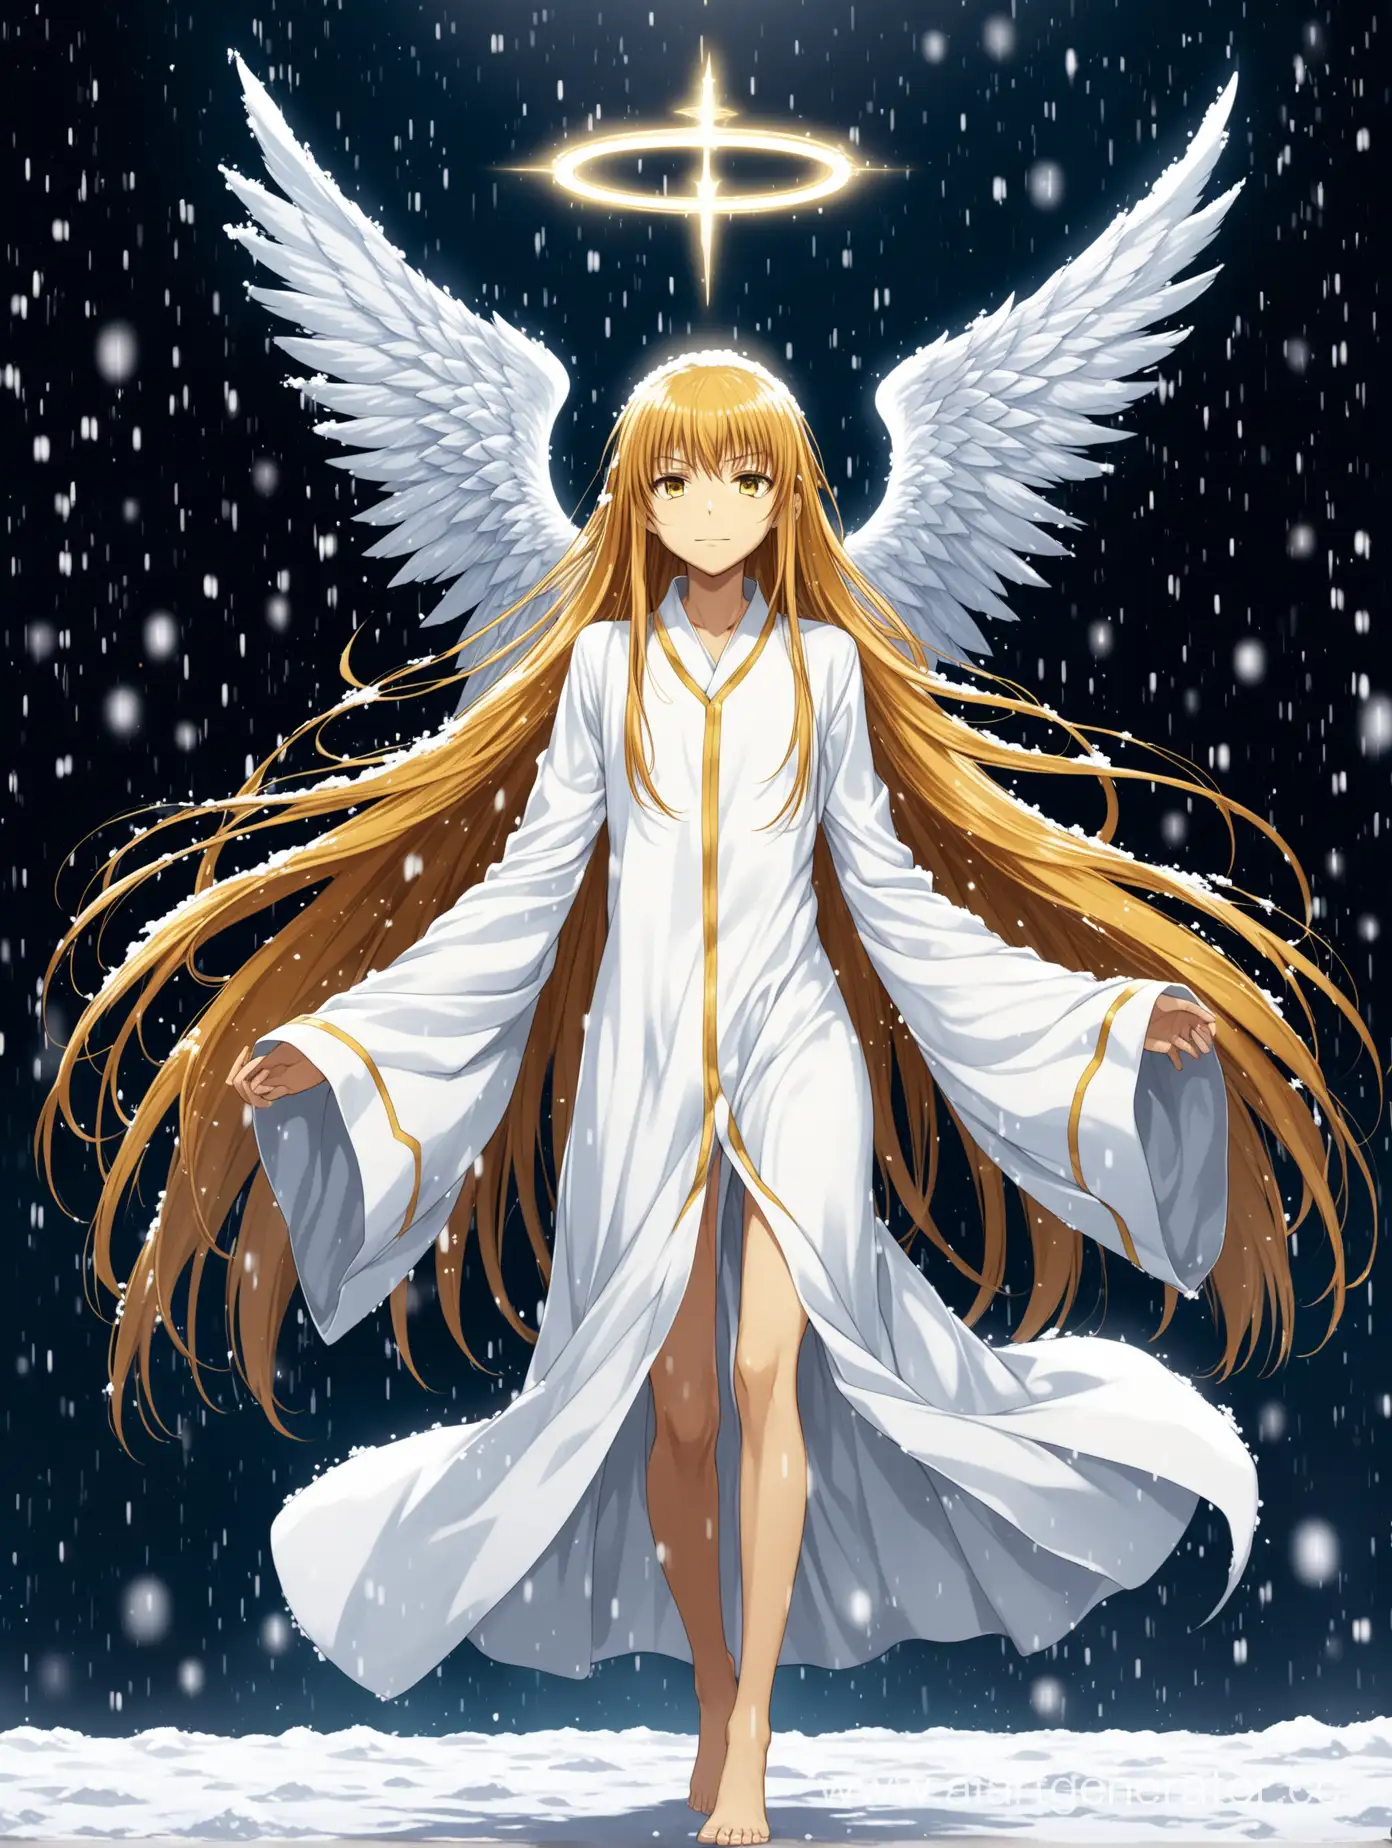 Aiwass-the-GoldenHaired-Angel-in-a-Serene-Snowy-Night